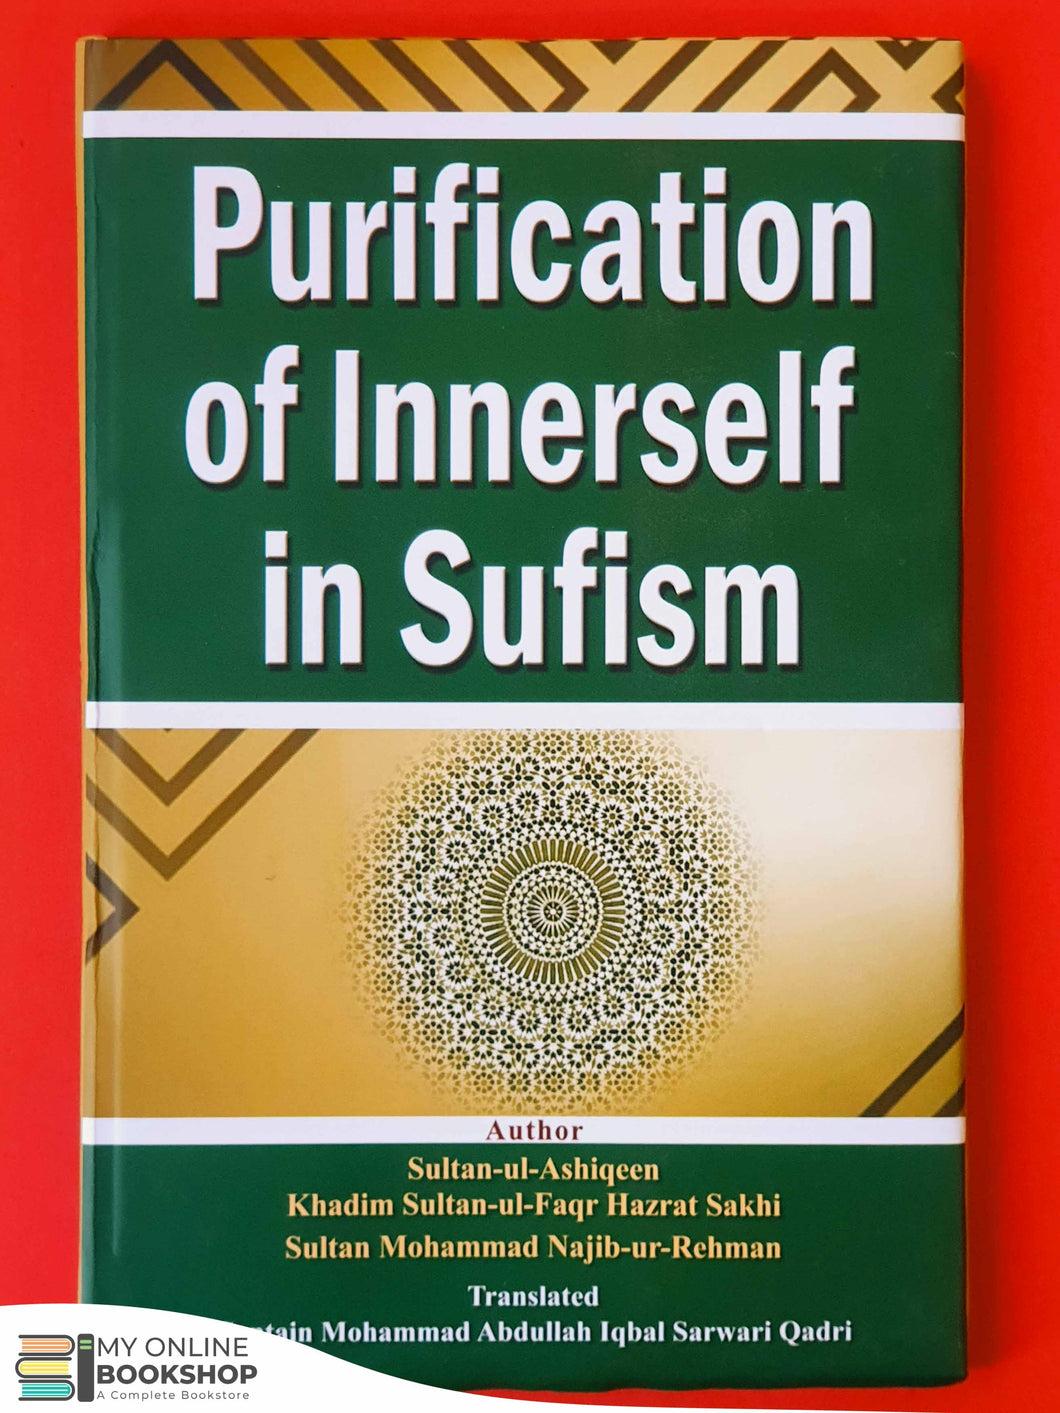 Purification of Inner self in Sufism